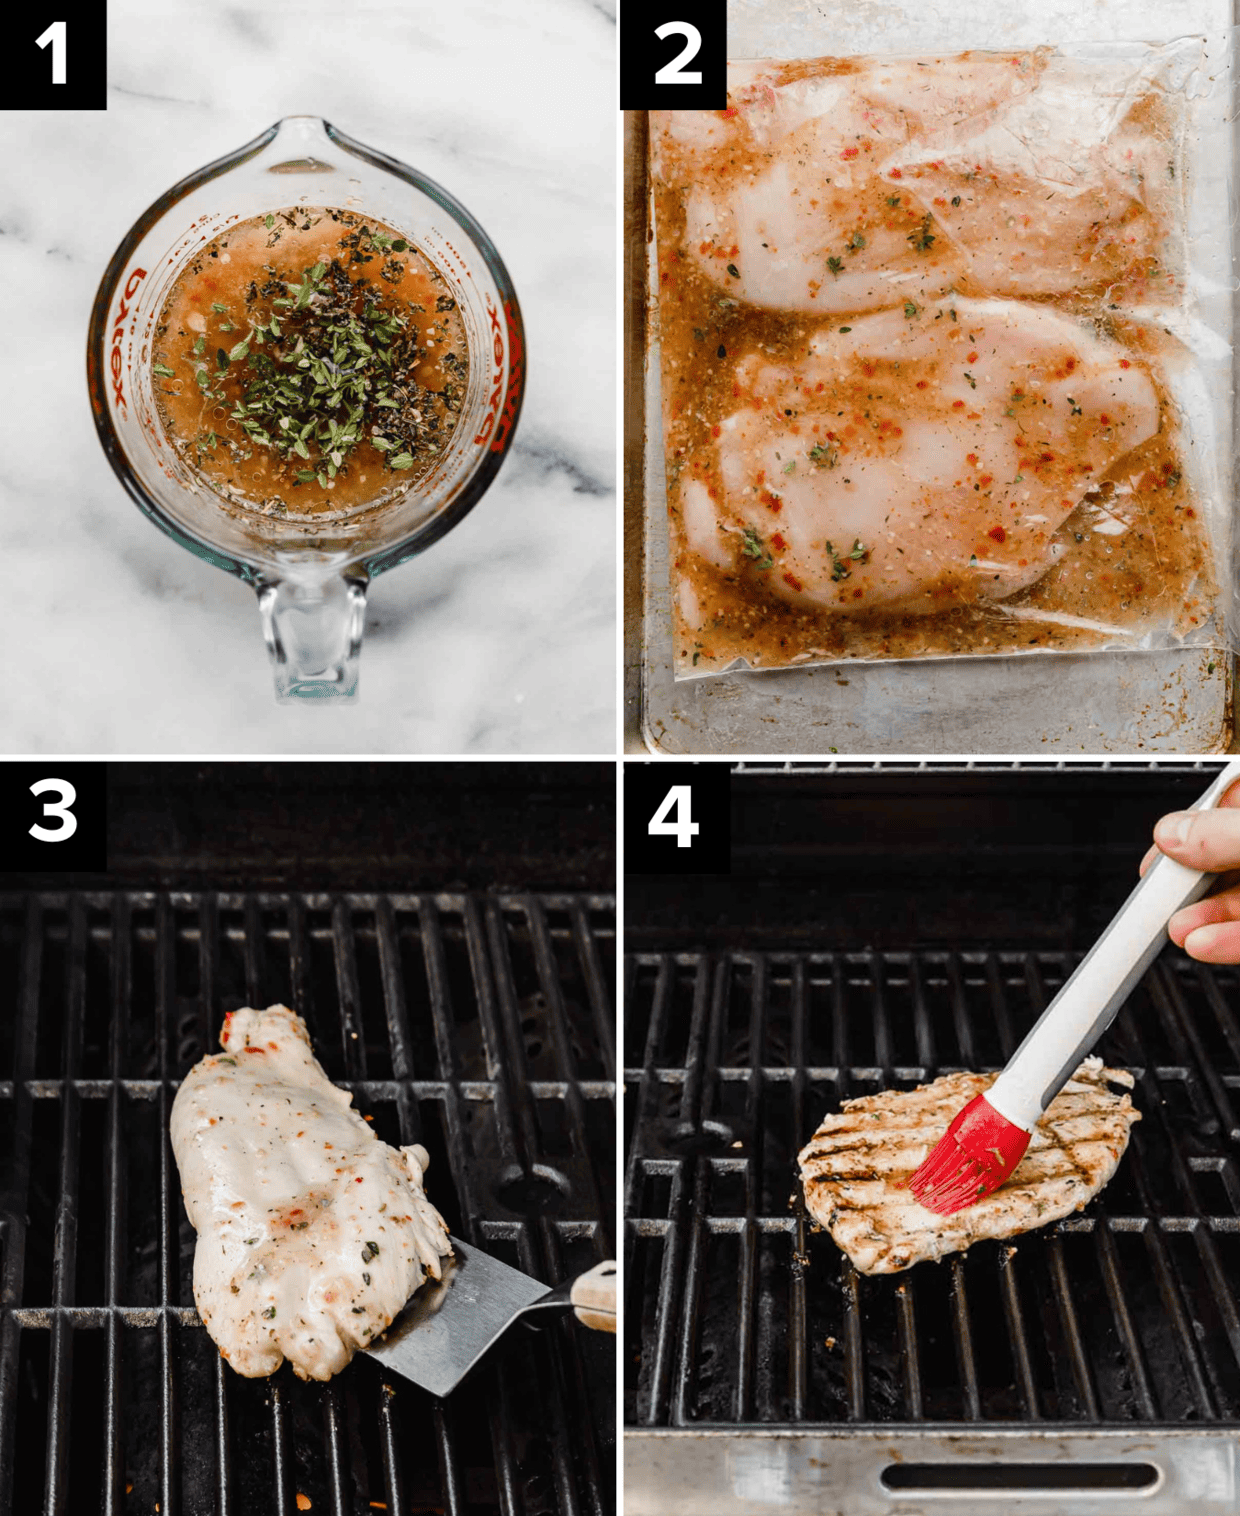 Four photos showing how to make Italian Grilled Chicken, top left image is Italian dressing and seasoning in a glass cup, top right image is chicken and Italian chicken marinade in a ziplock bag, bottom left is chicken on a grill, bottom right image is a basting brush basting a chicken breast.